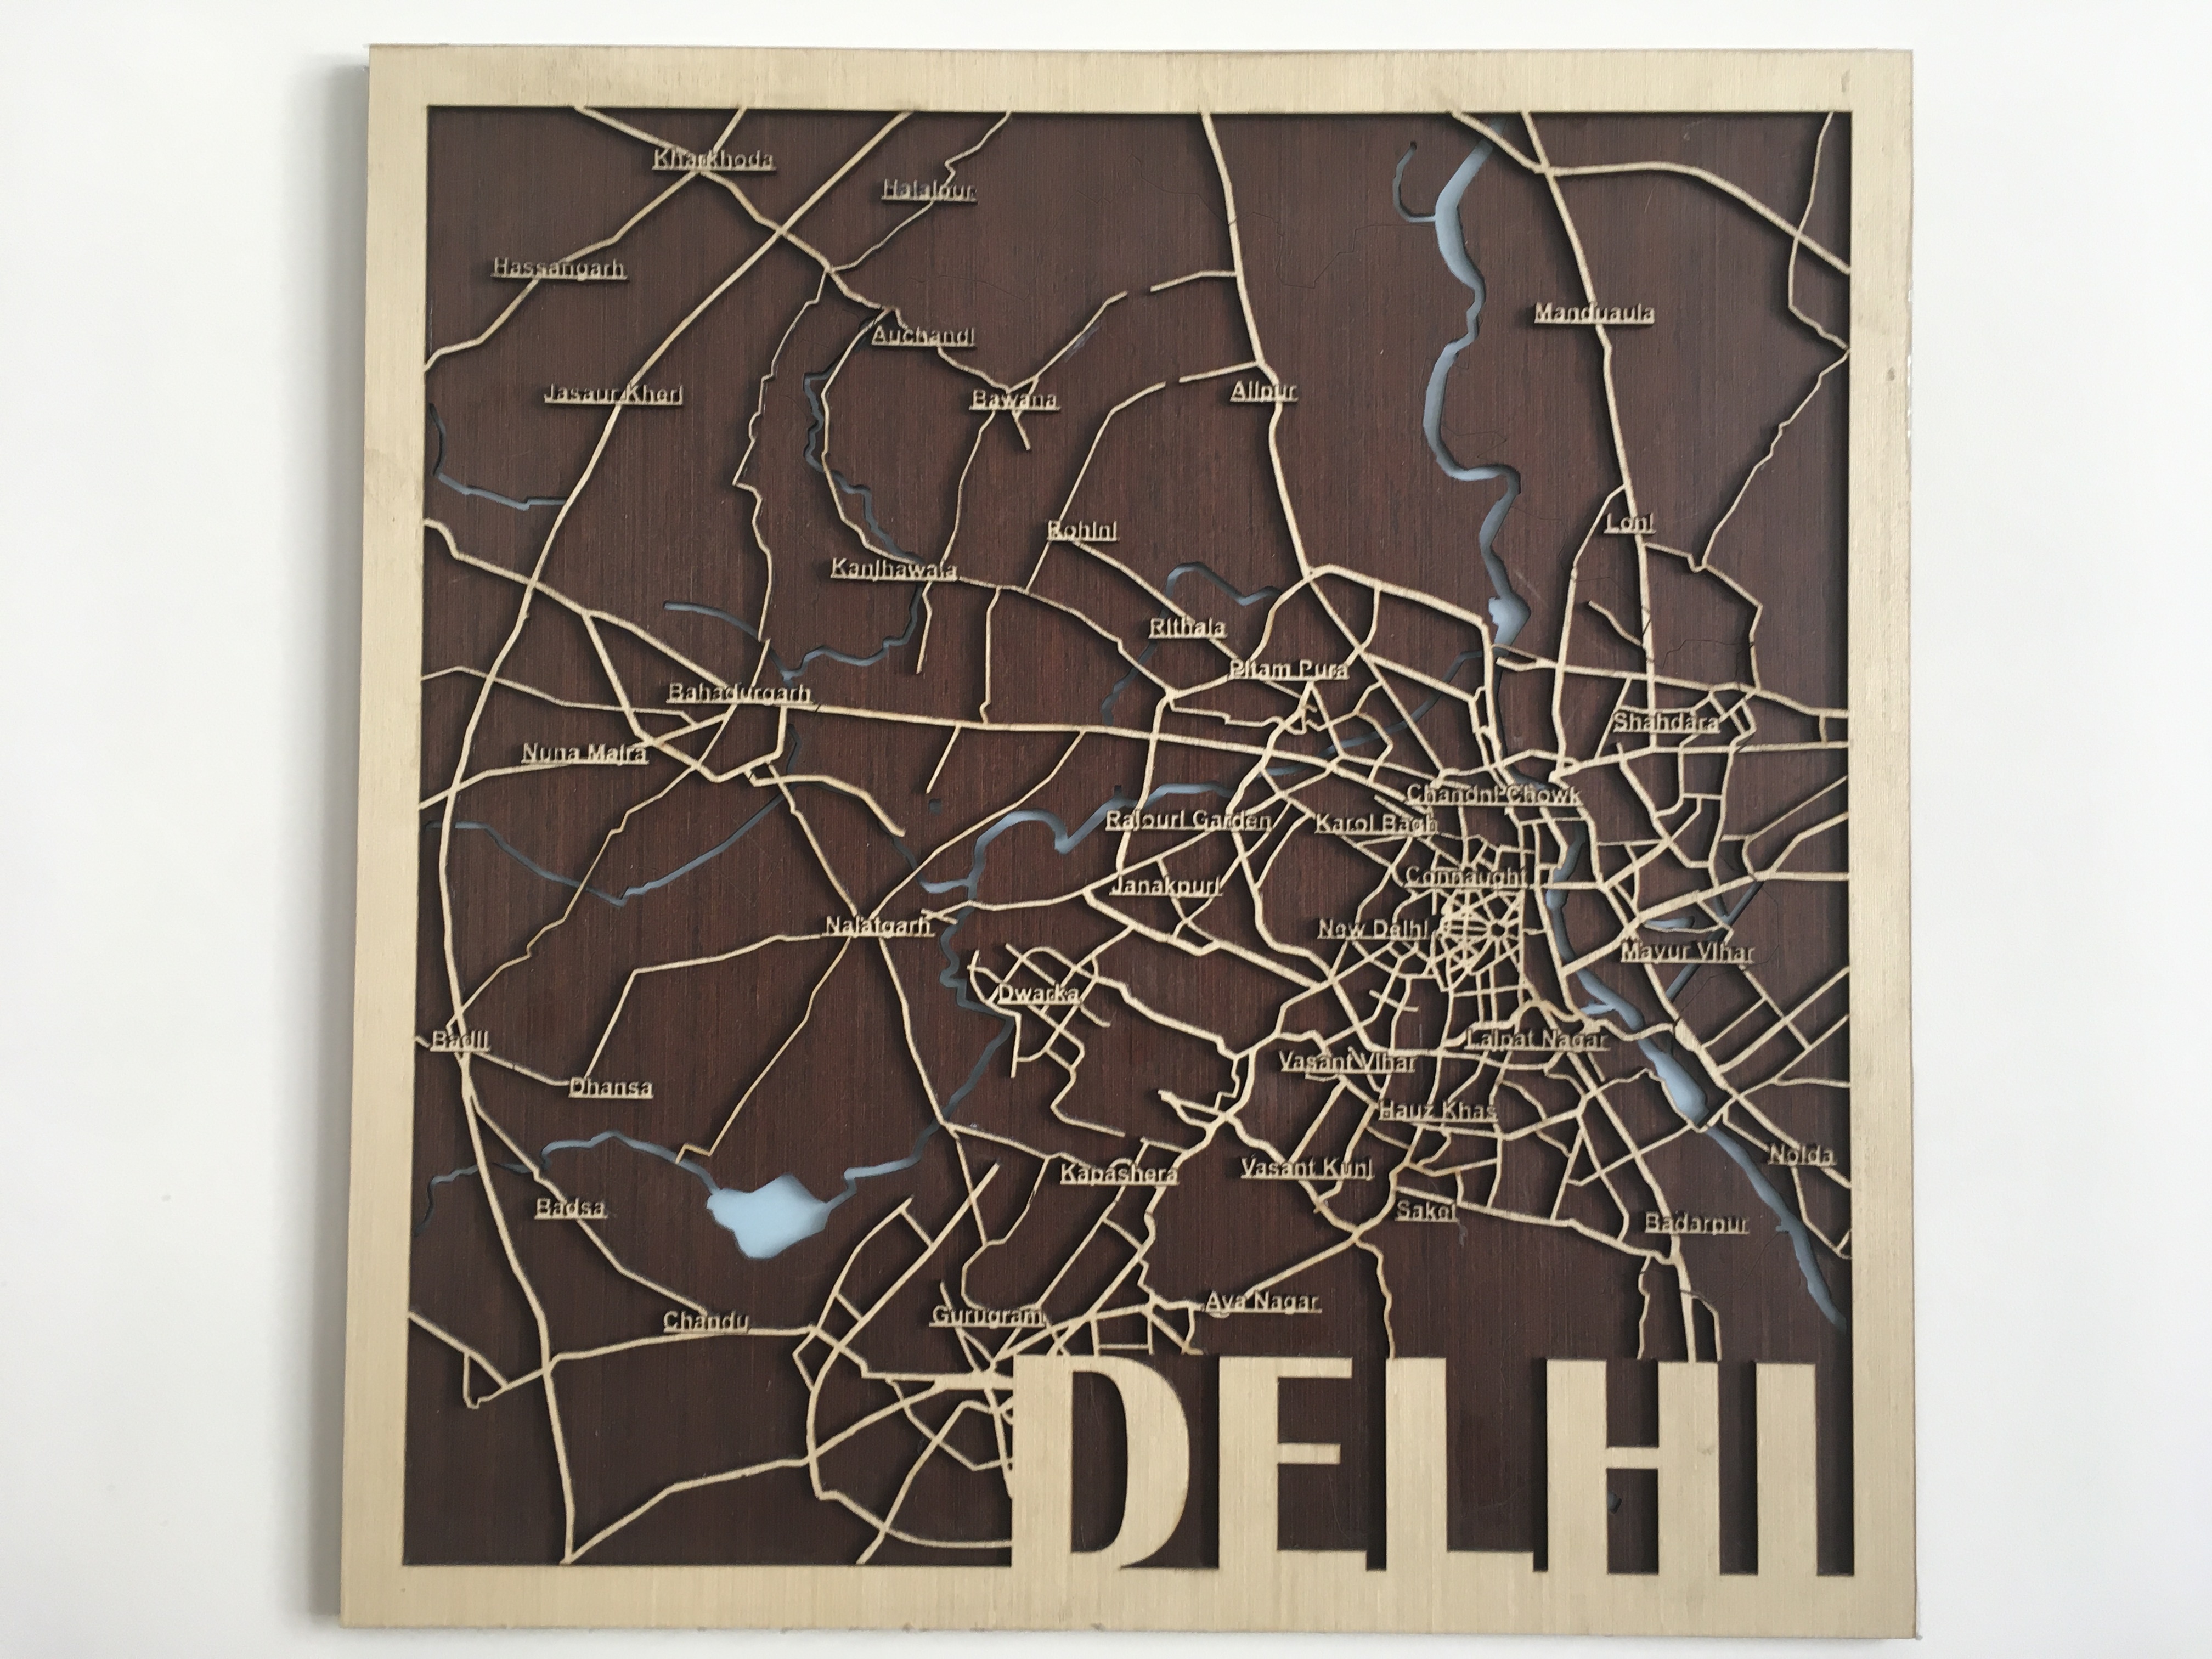 Enchanting Cartography Wooden City Maps for Wall Delight